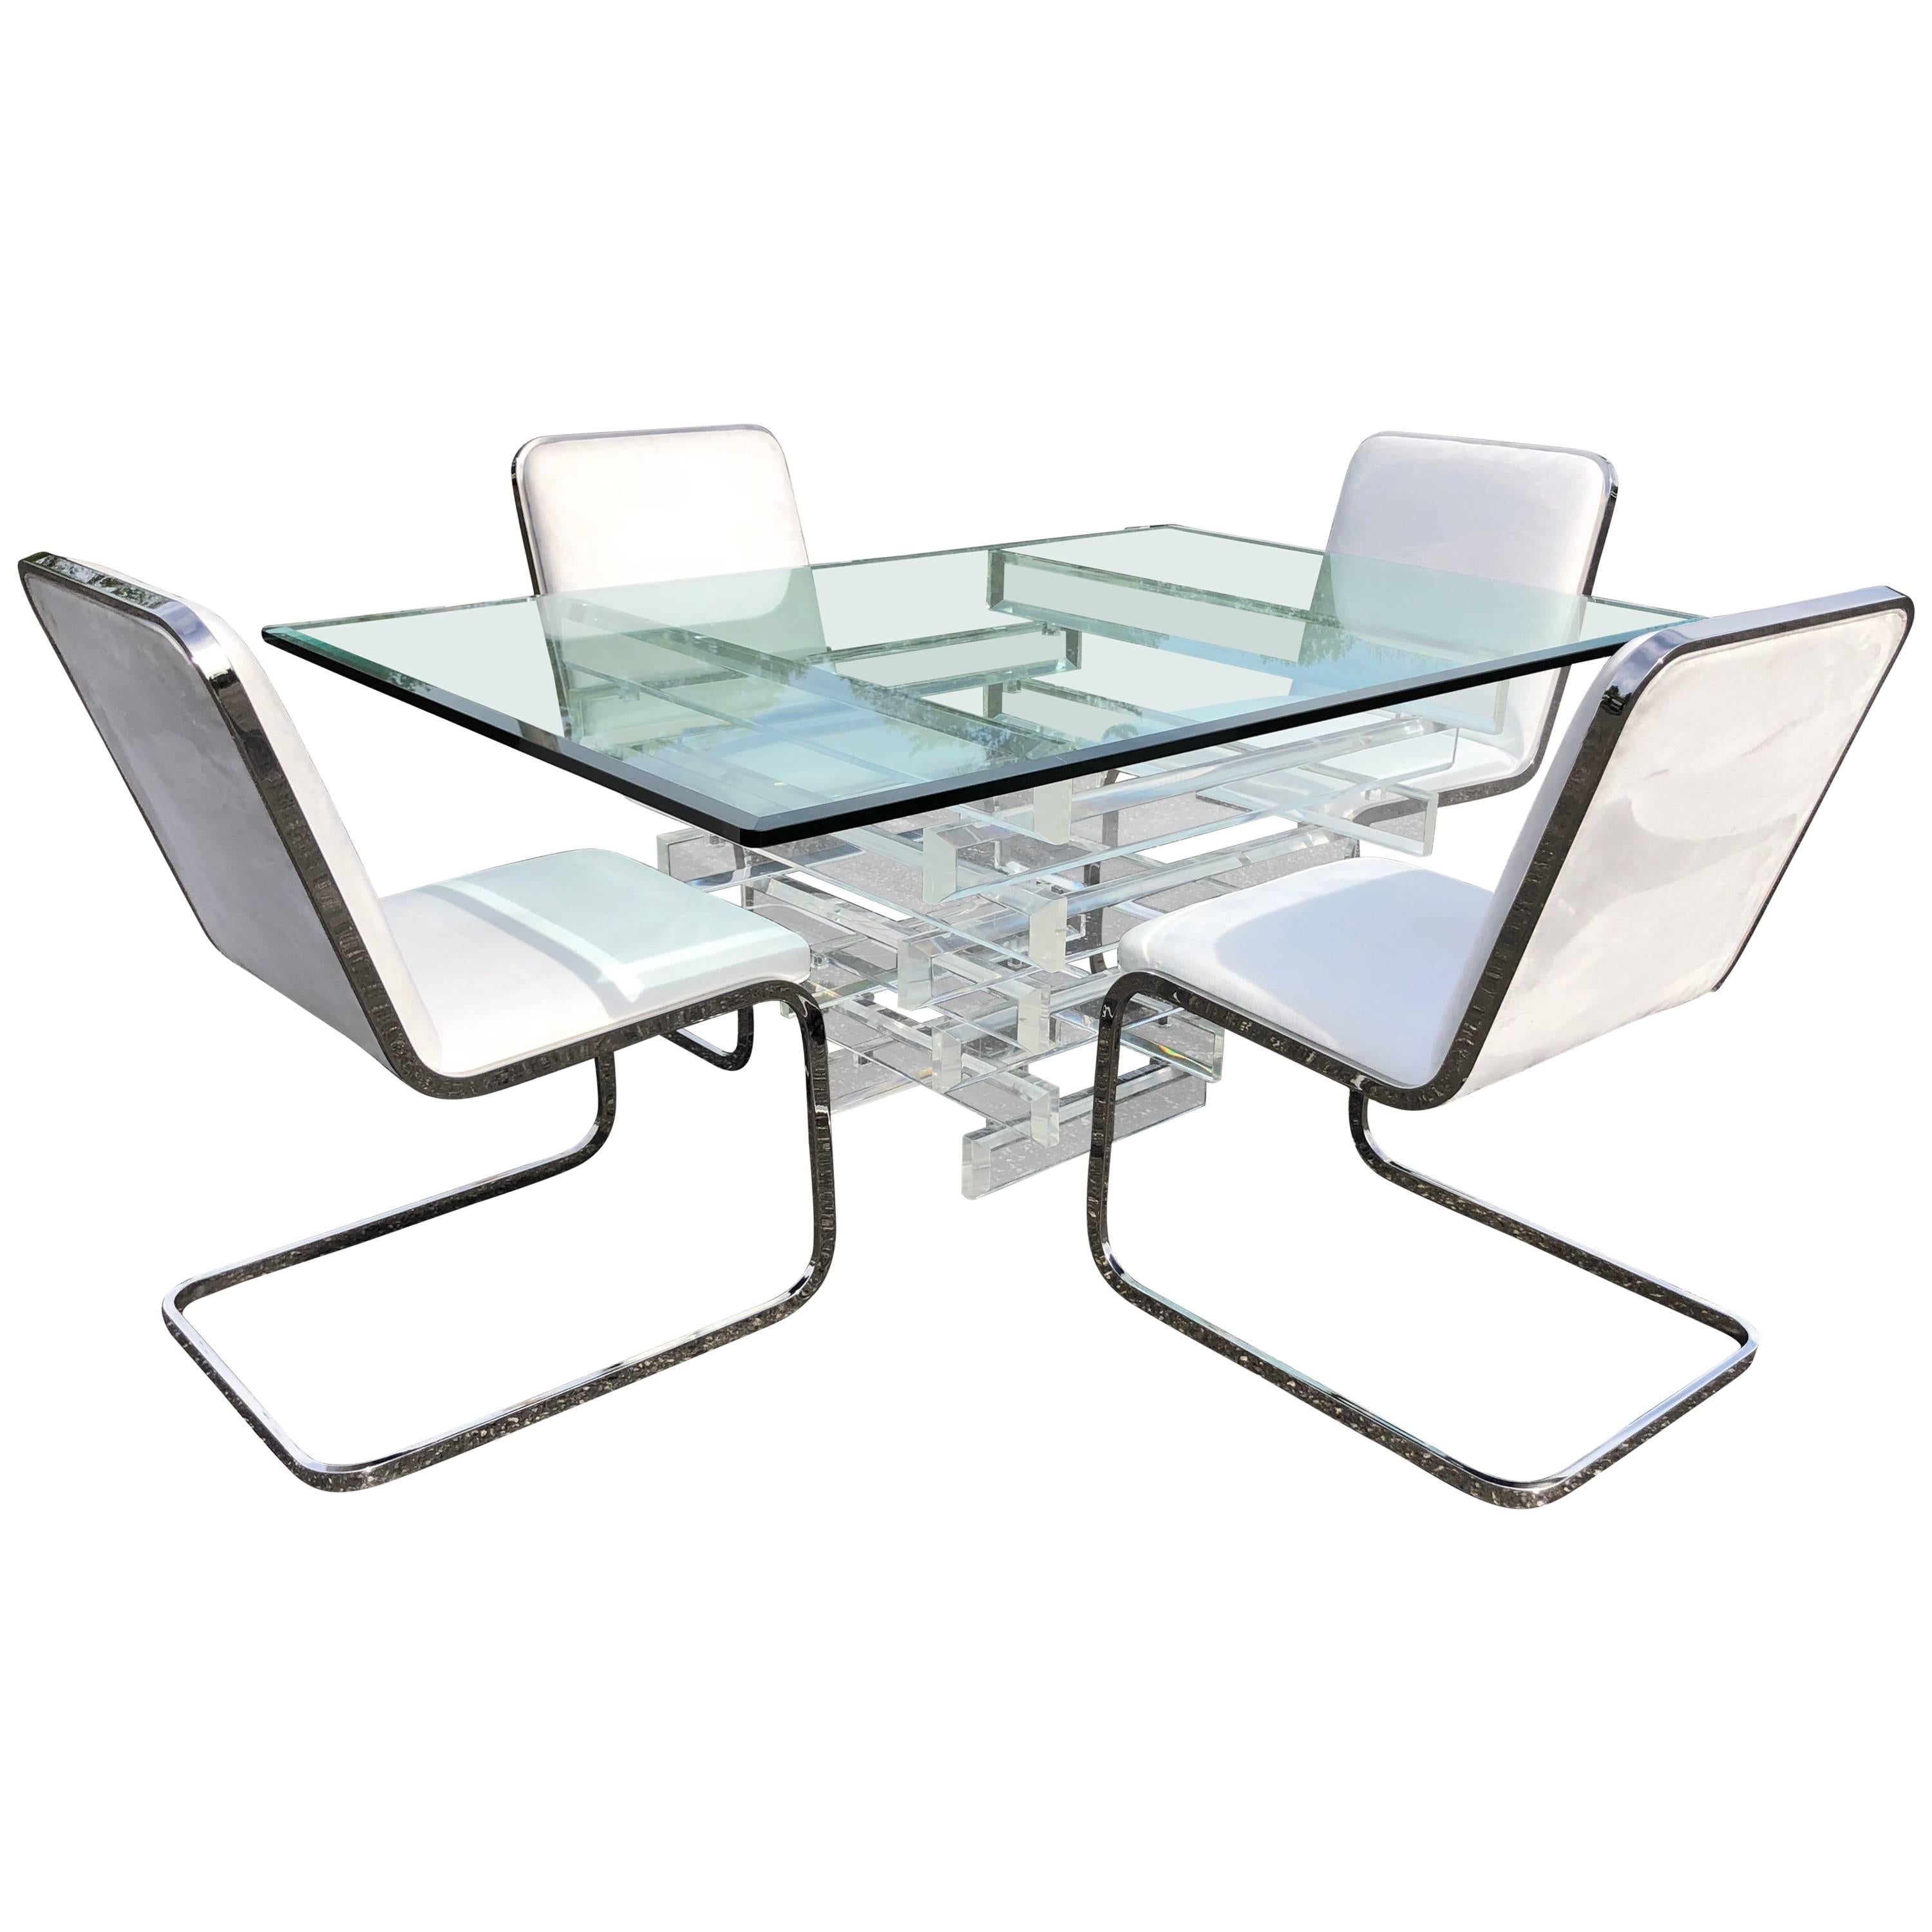 Hollywood Regency Lucite and Glass Dining Table with Four Chrome Chairs